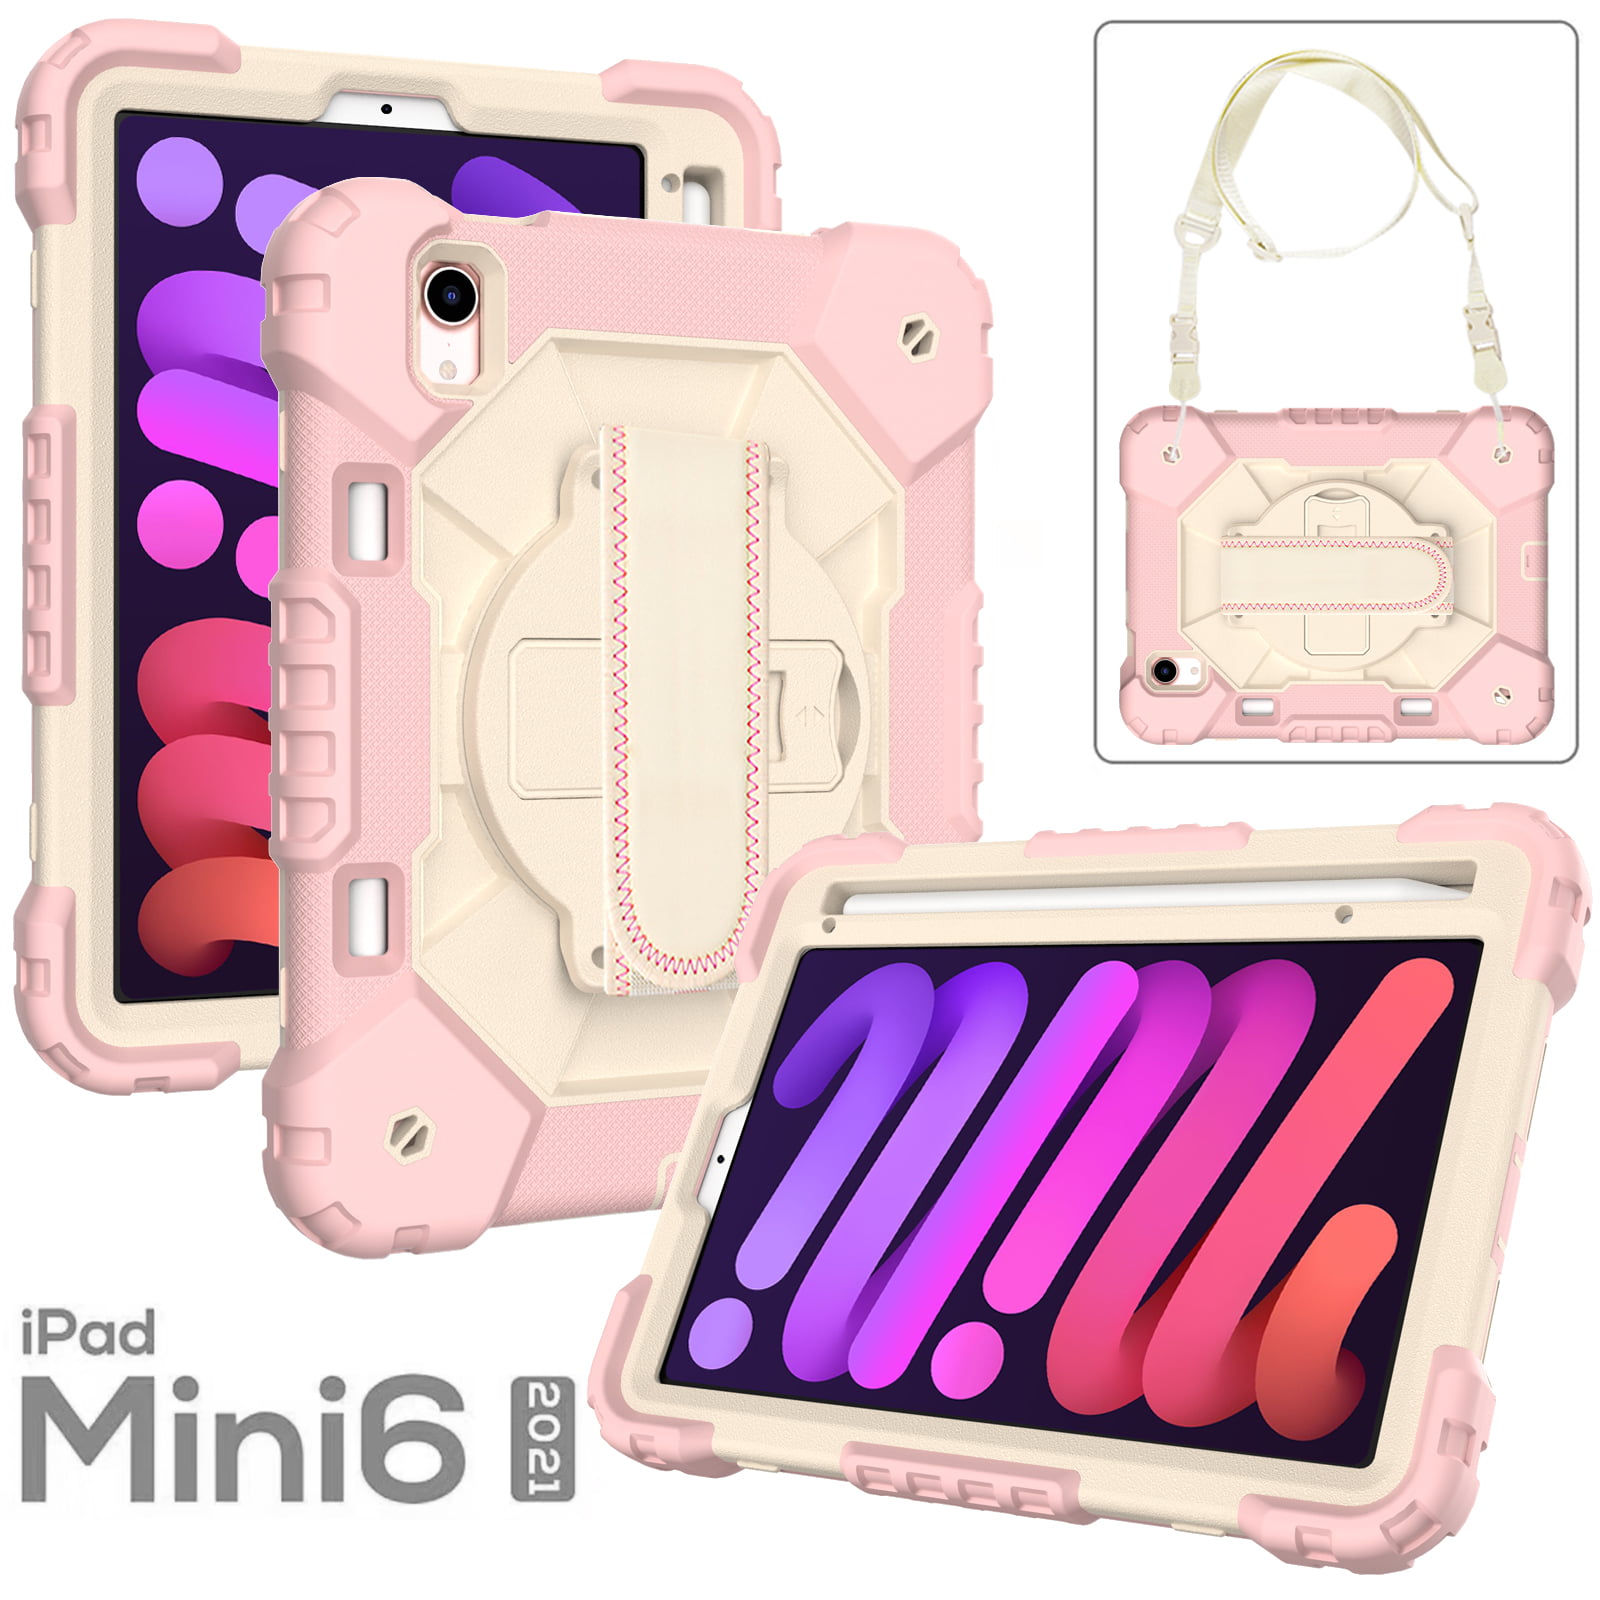 Heavy Duty Shockproof iPad Mini 6 Case with Screen Protector Pencil Holder 360 Rotating Stand Rose SEYMAC stock Case for iPad Mini 6th Generation 8.3 Inch 2021 Hand Strap & Shoulder Strap 